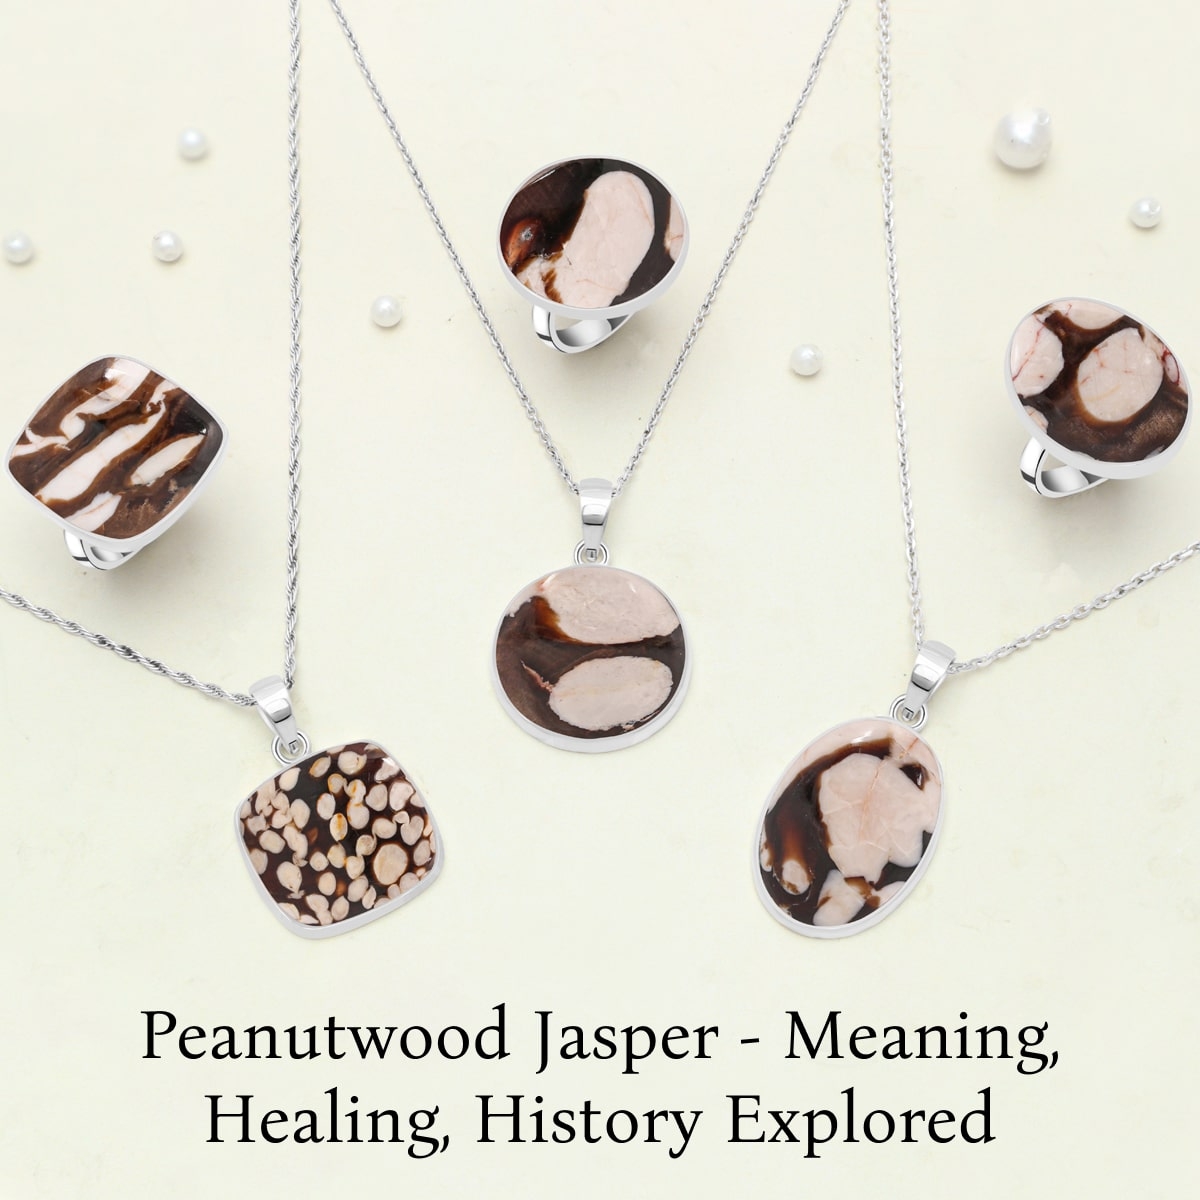 Peanutwood Jasper Jewelry - Meaning, History, Healing Properties, Facts and Uses